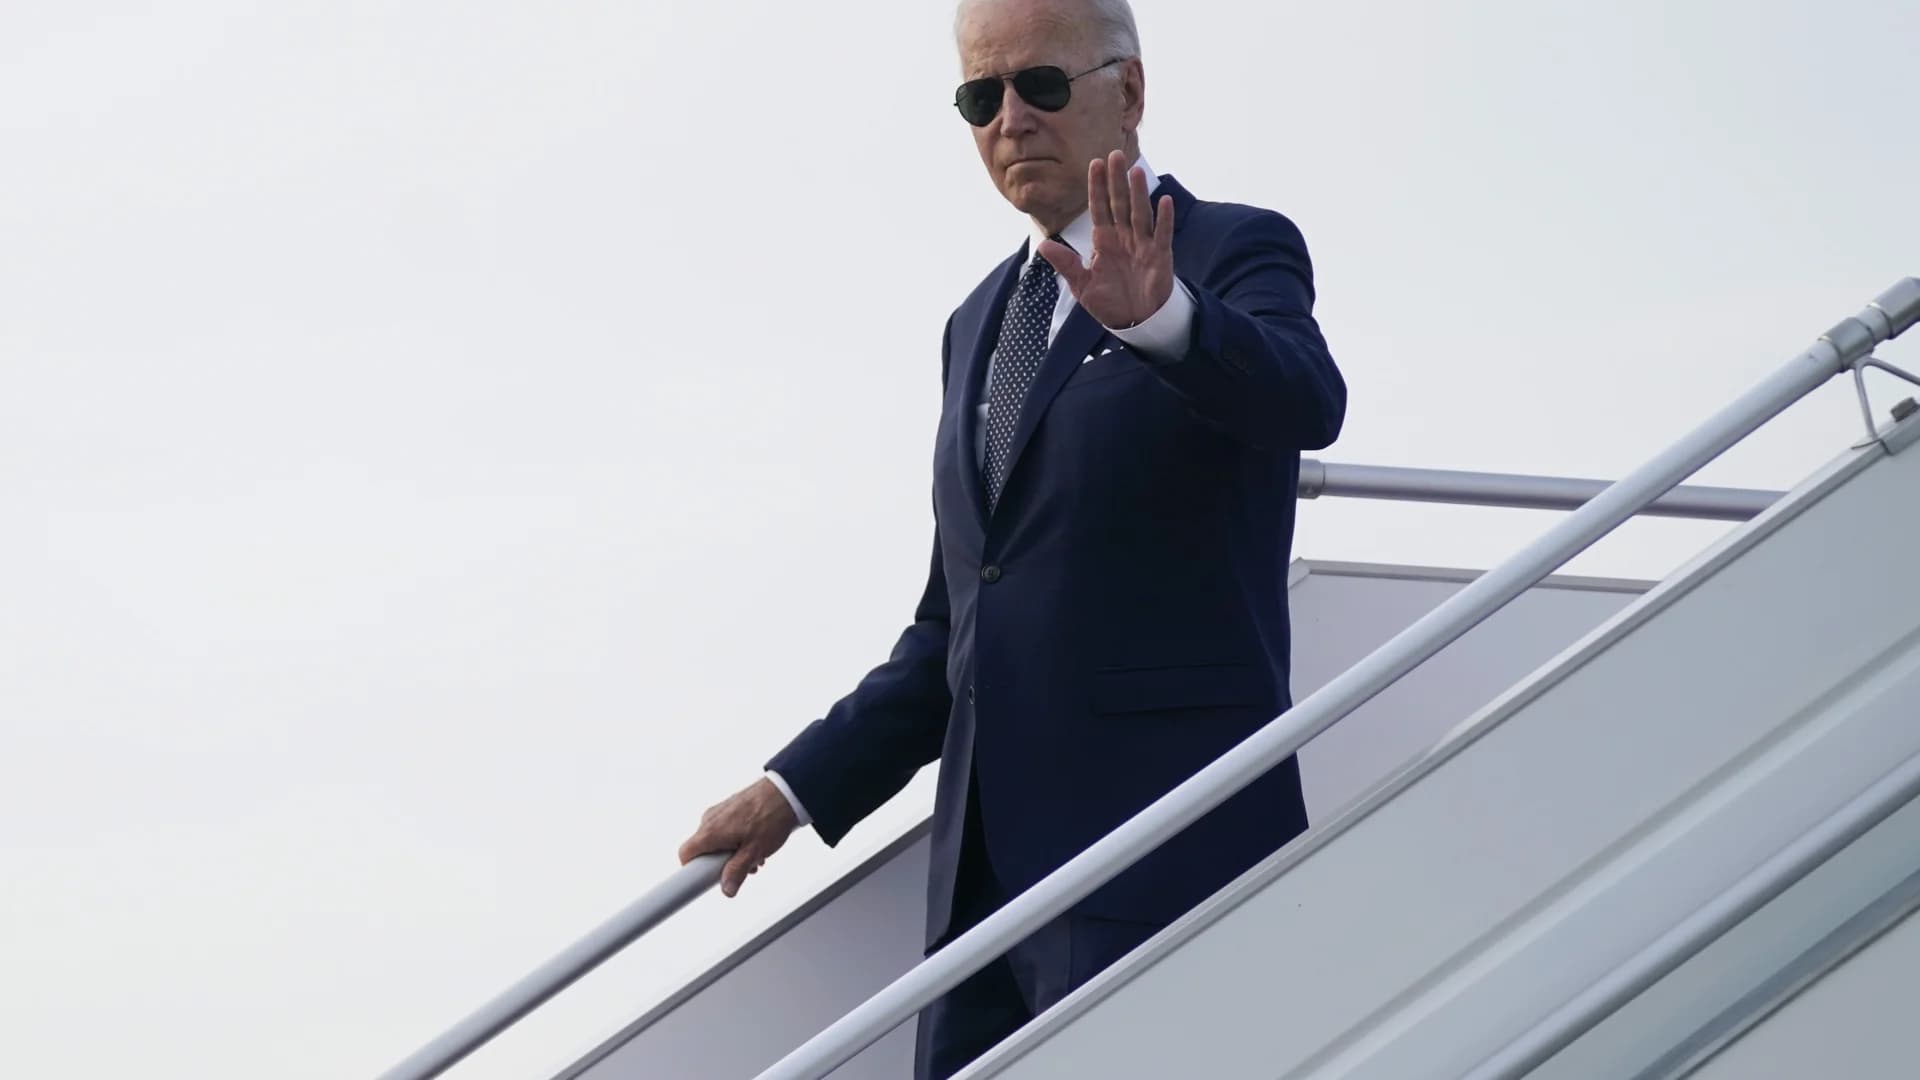 Biden tells Dems to quickly pass pared-down economic package